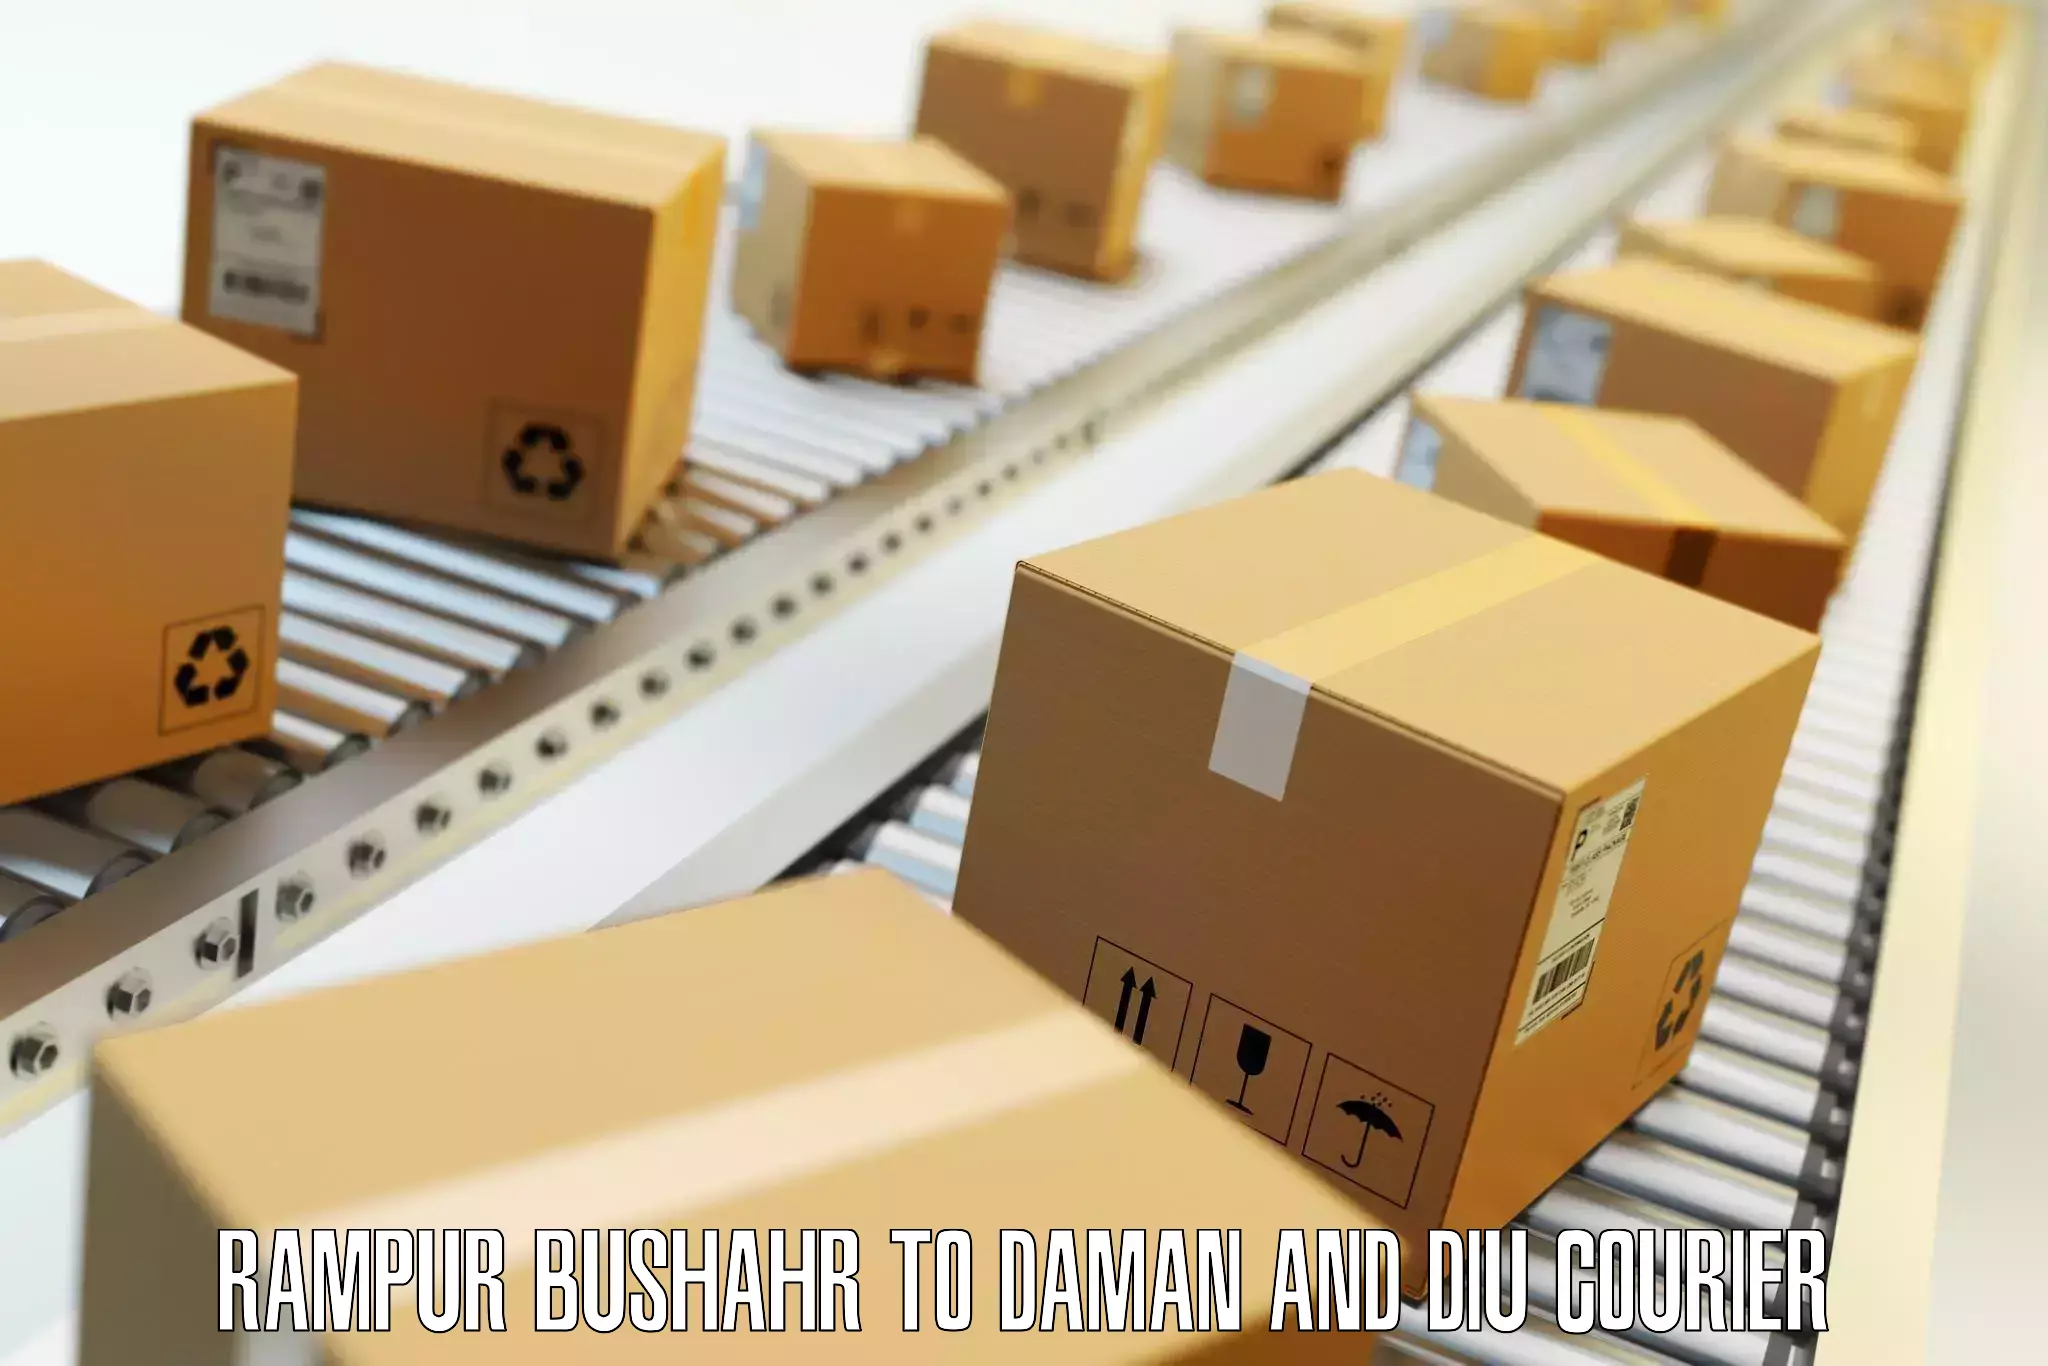 Expedited baggage courier Rampur Bushahr to Diu